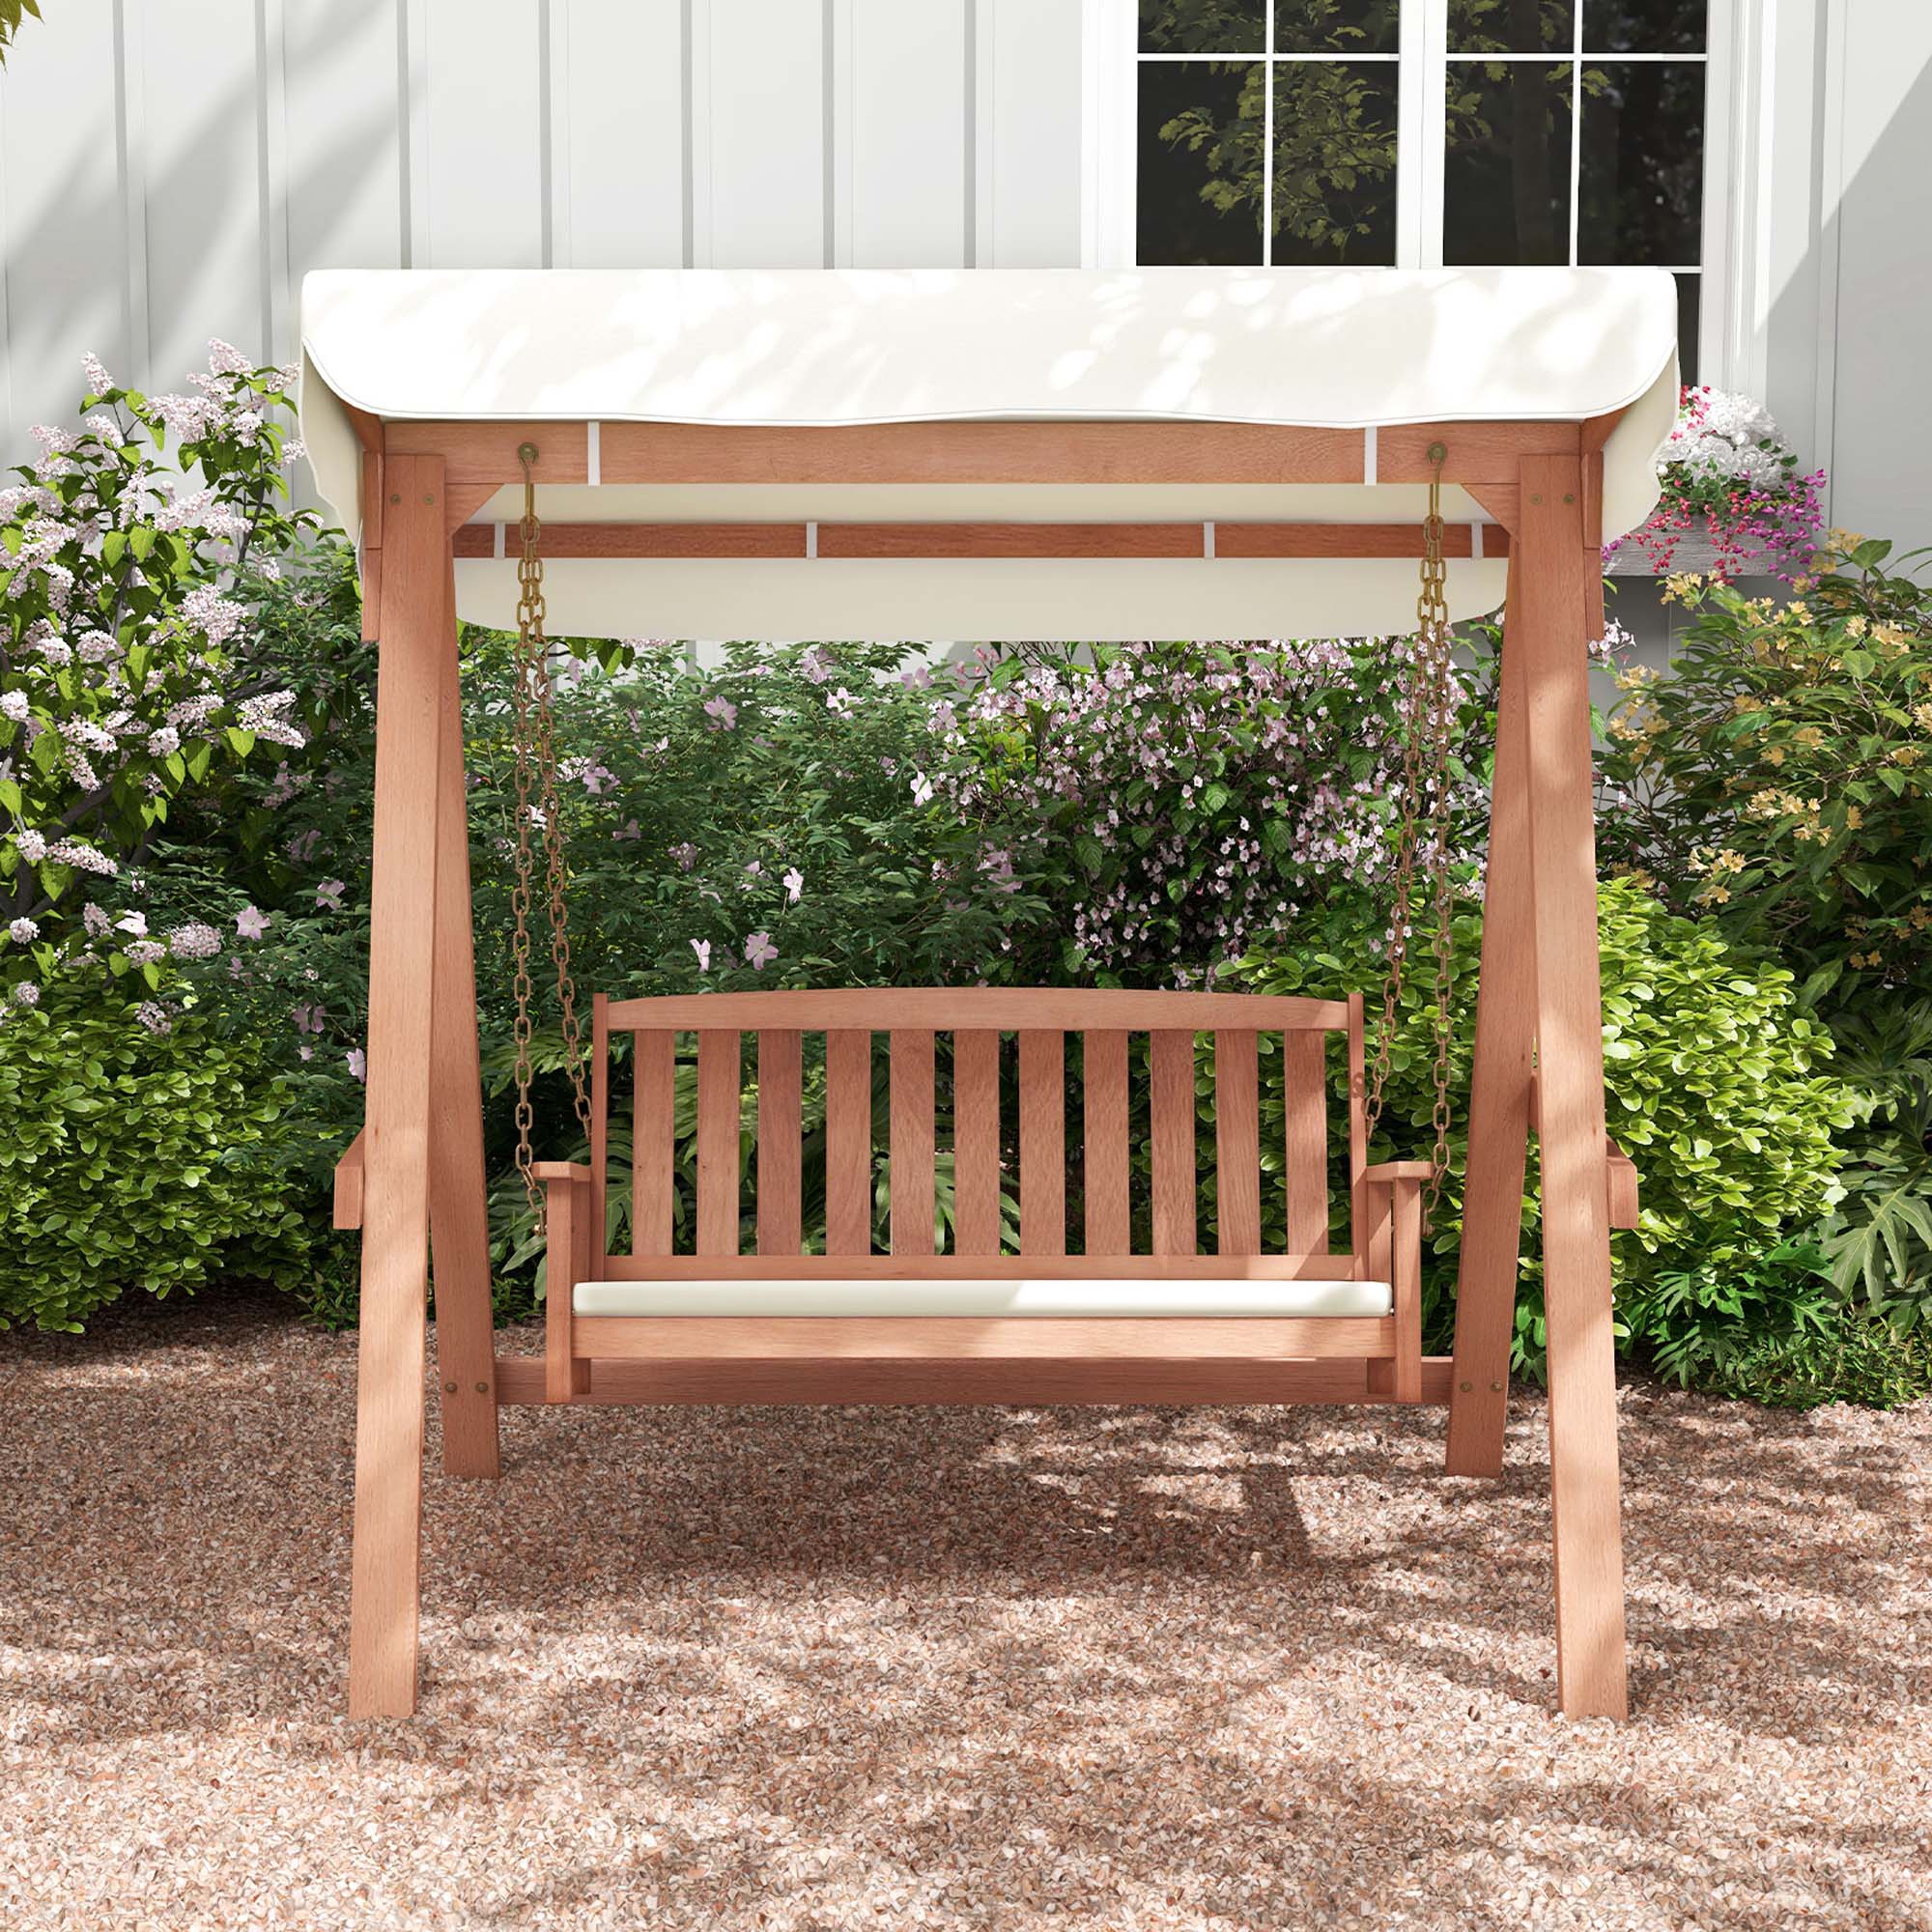 Costway Wood Porch Swing with Canopy Outdoor Patio 2-Seat Swing Bench with Cushions Backyard